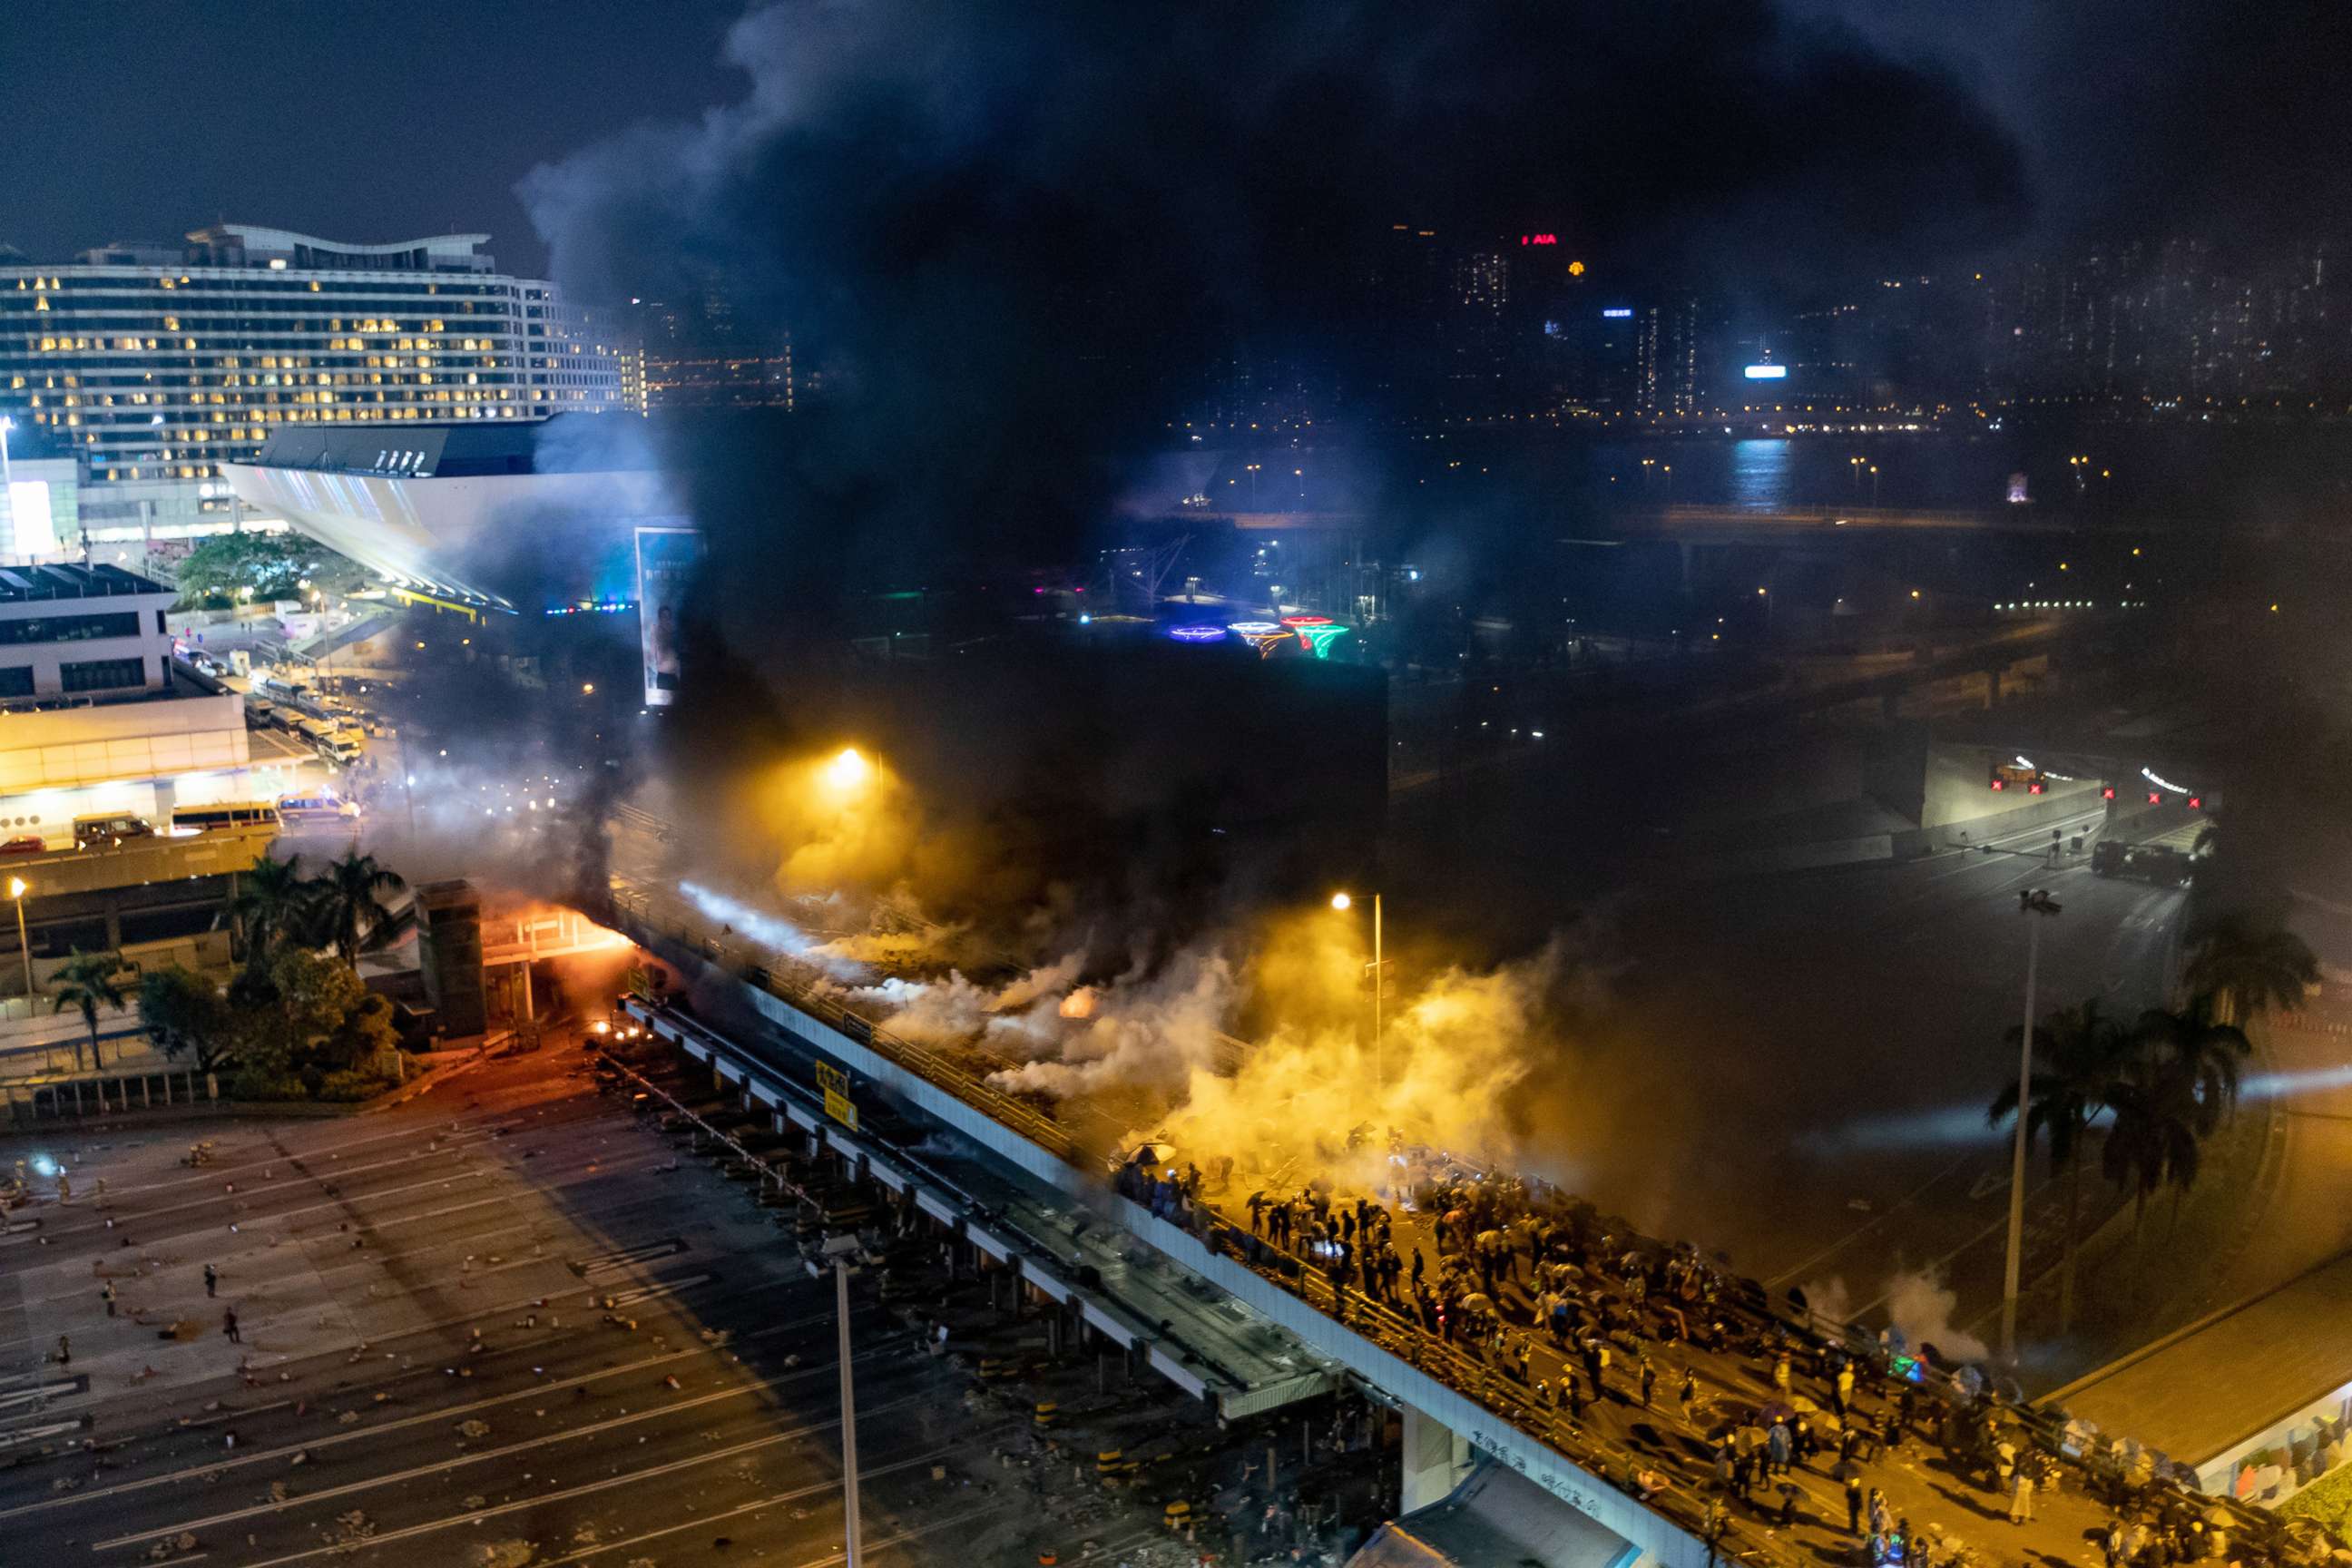 PHOTO: A huge cloud of smoke from an explosion rises over the footbridge on the drive way in front of Hong Kong Coliseum and Hong Kong harbor during the siege of Polytechnic University, Nov. 18, 2019.